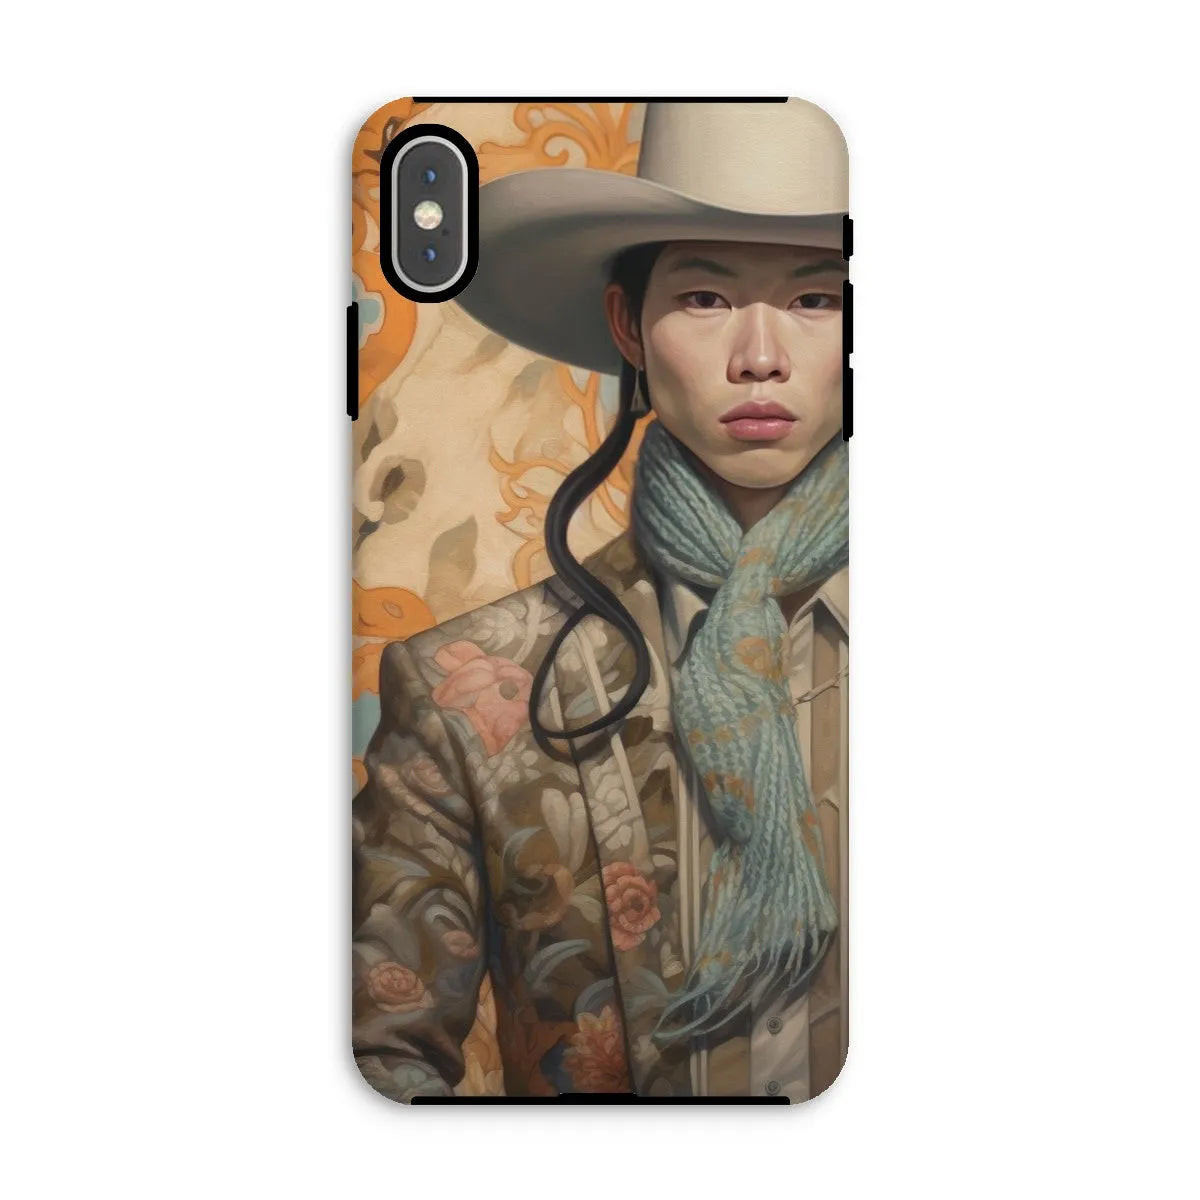 Baihu The Gay Cowboy - Gay Aesthetic Art Phone Case - Iphone Xs Max / Matte - Mobile Phone Cases - Aesthetic Art